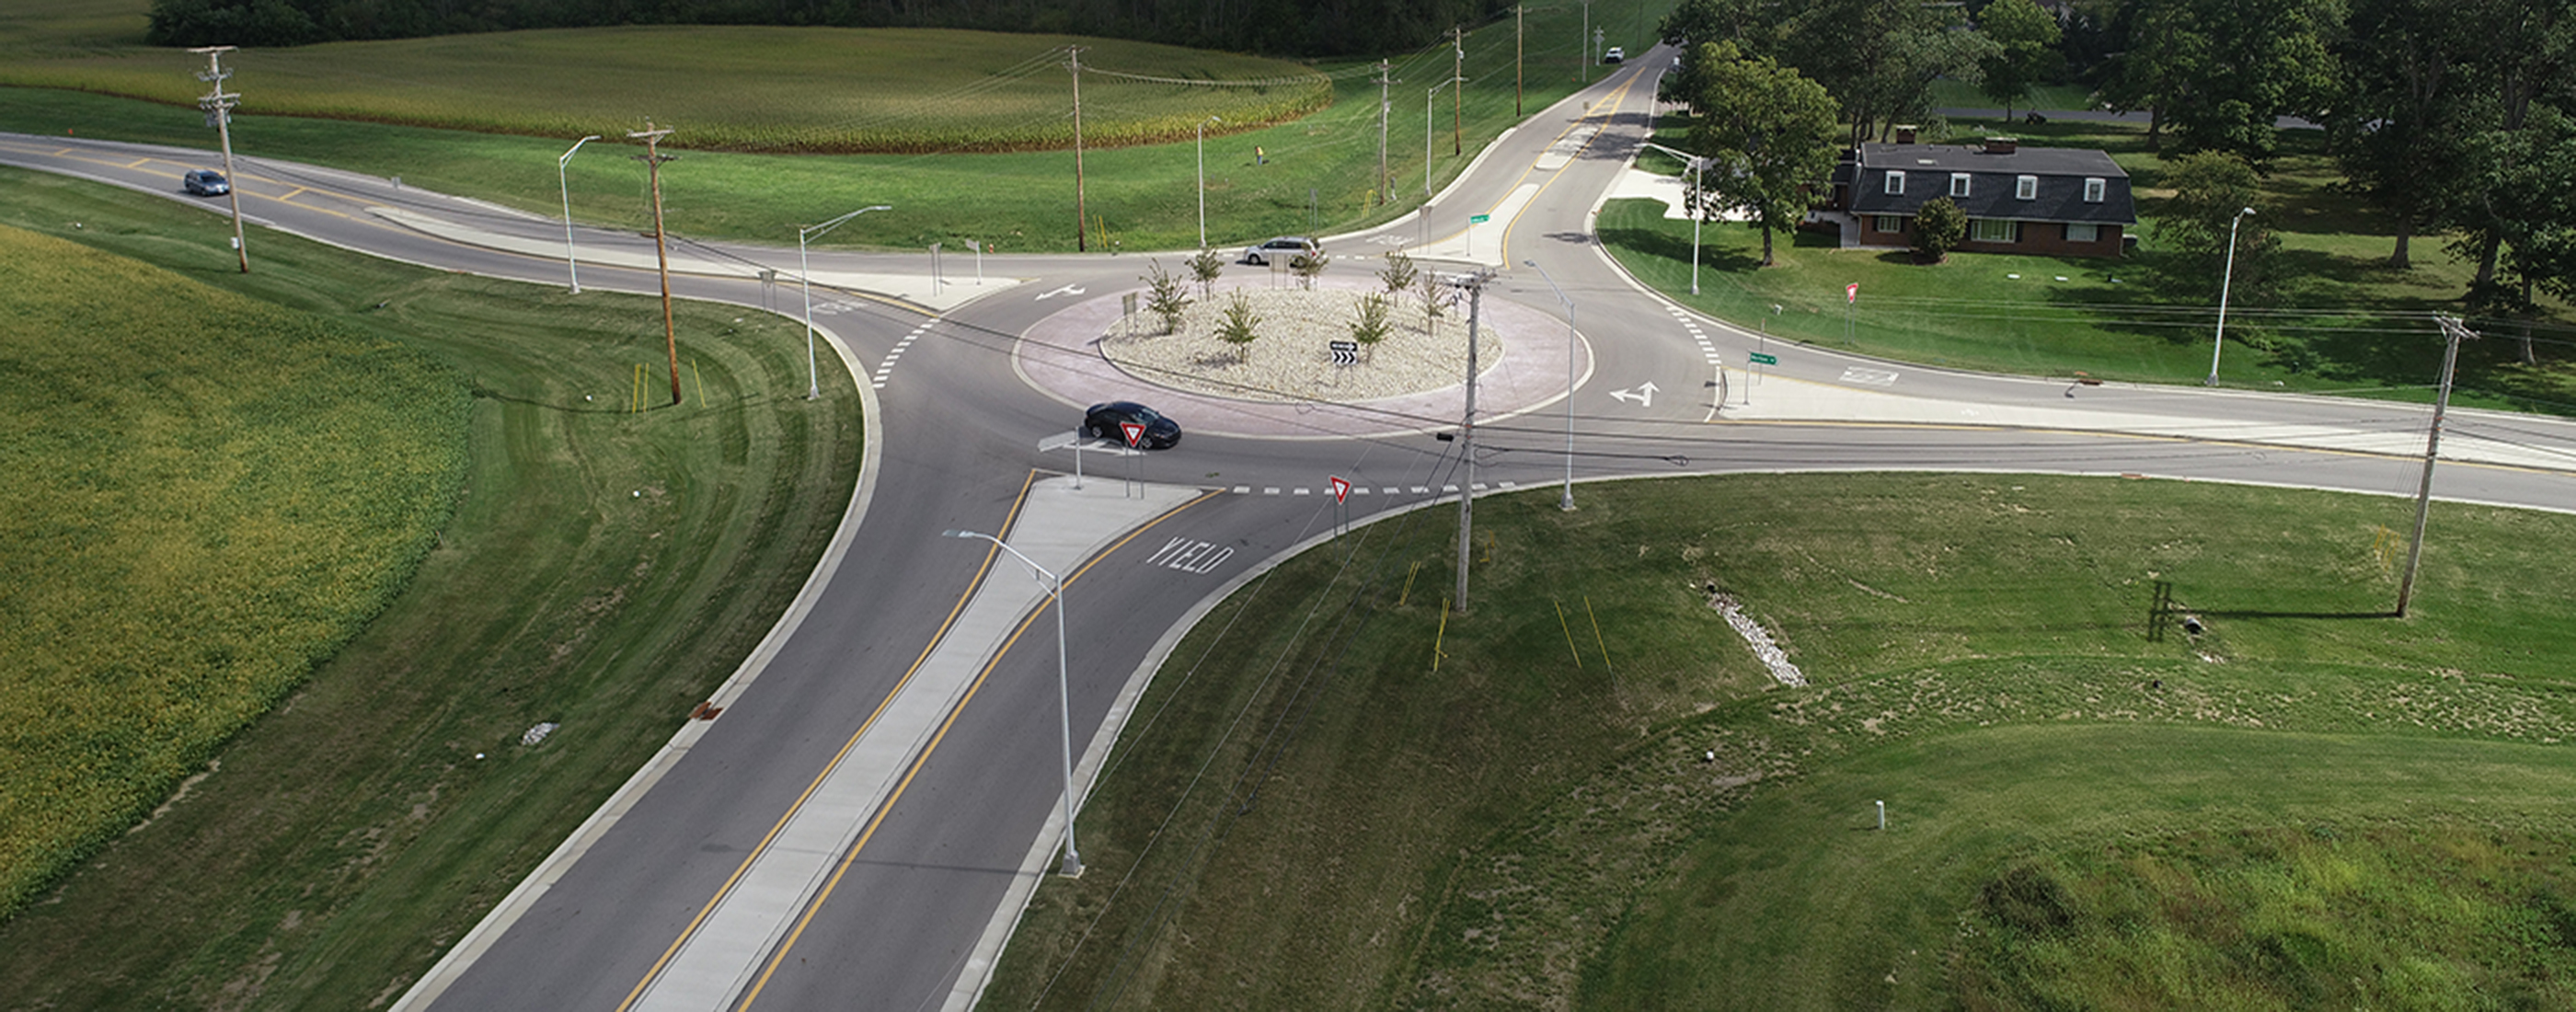 The new single-lane roundabout at Norton and Johnson Roads reduces congestion and improves safety.